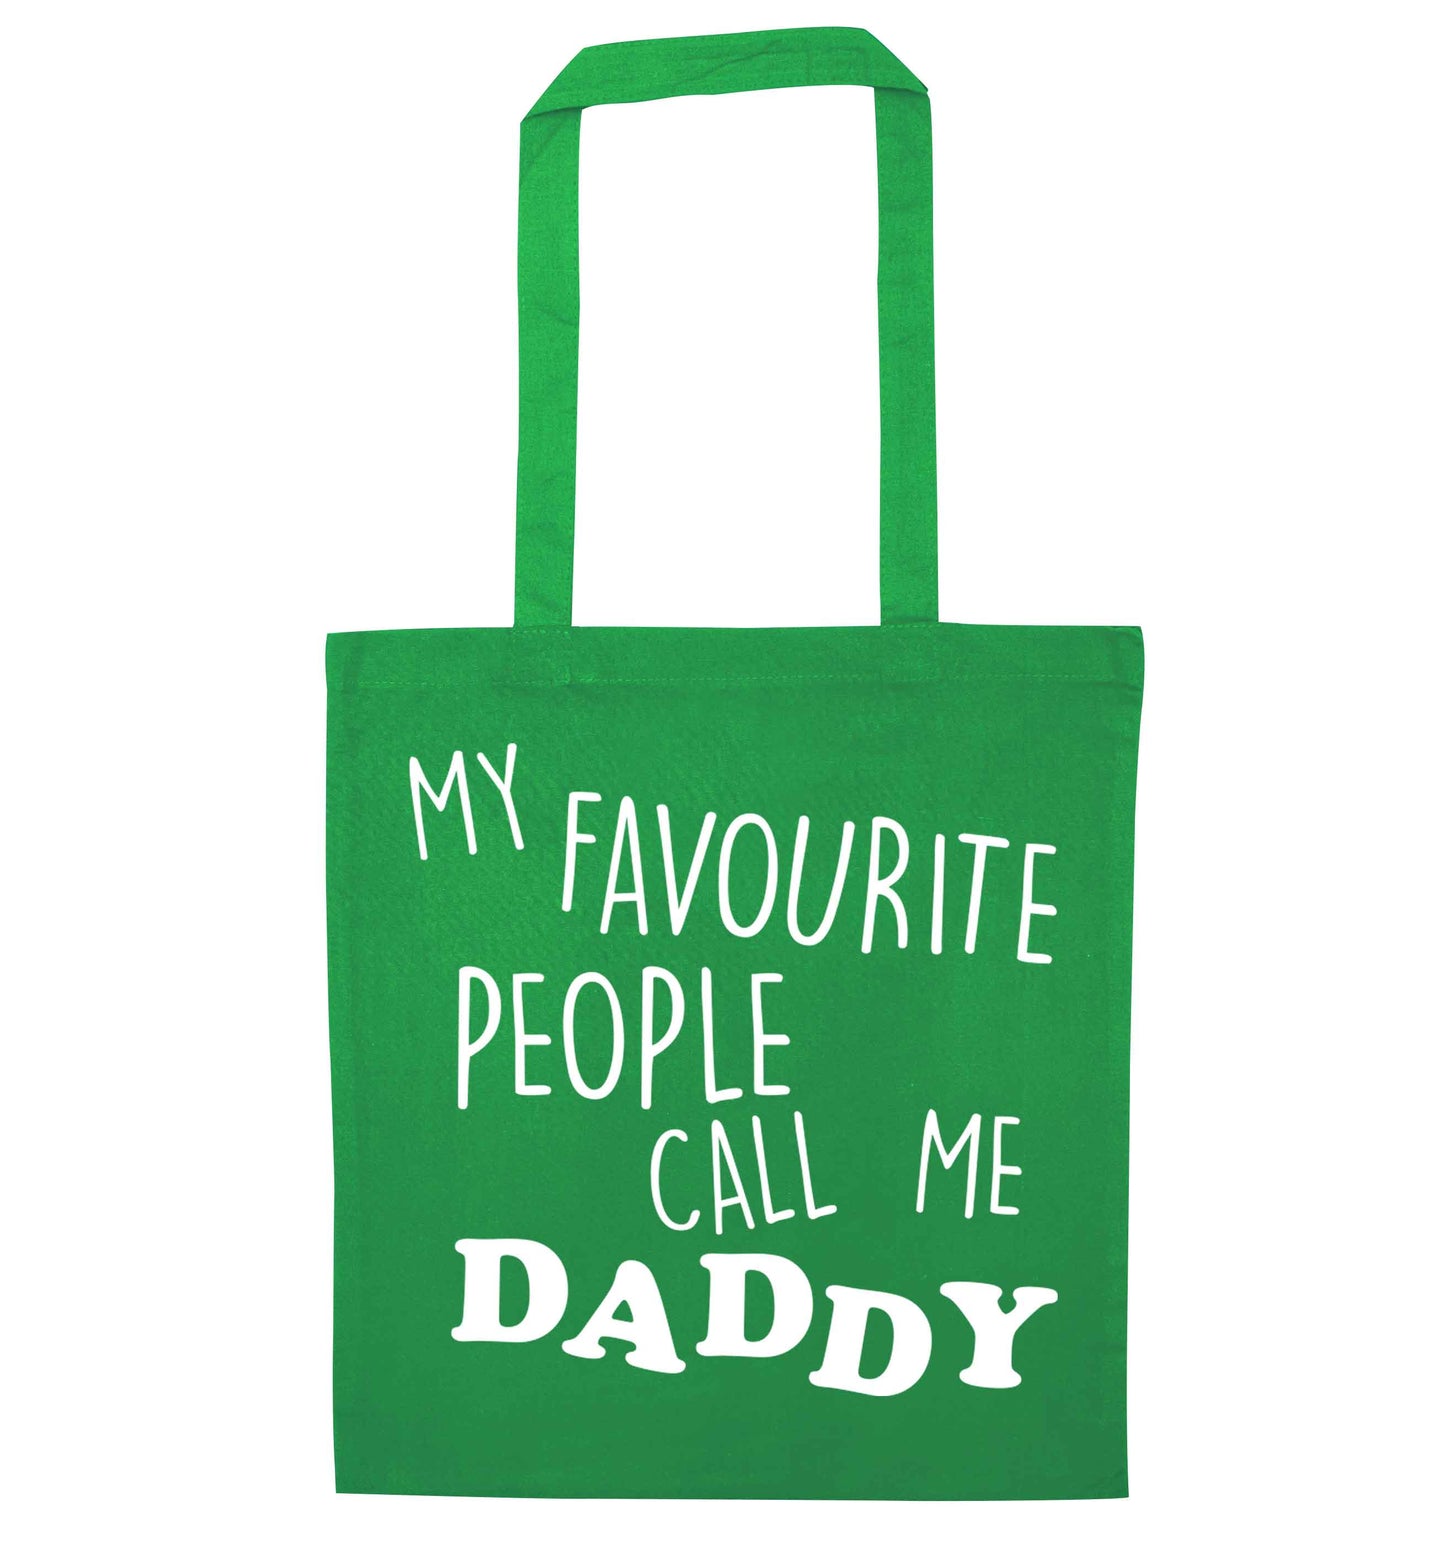 My favourite people call me daddy green tote bag